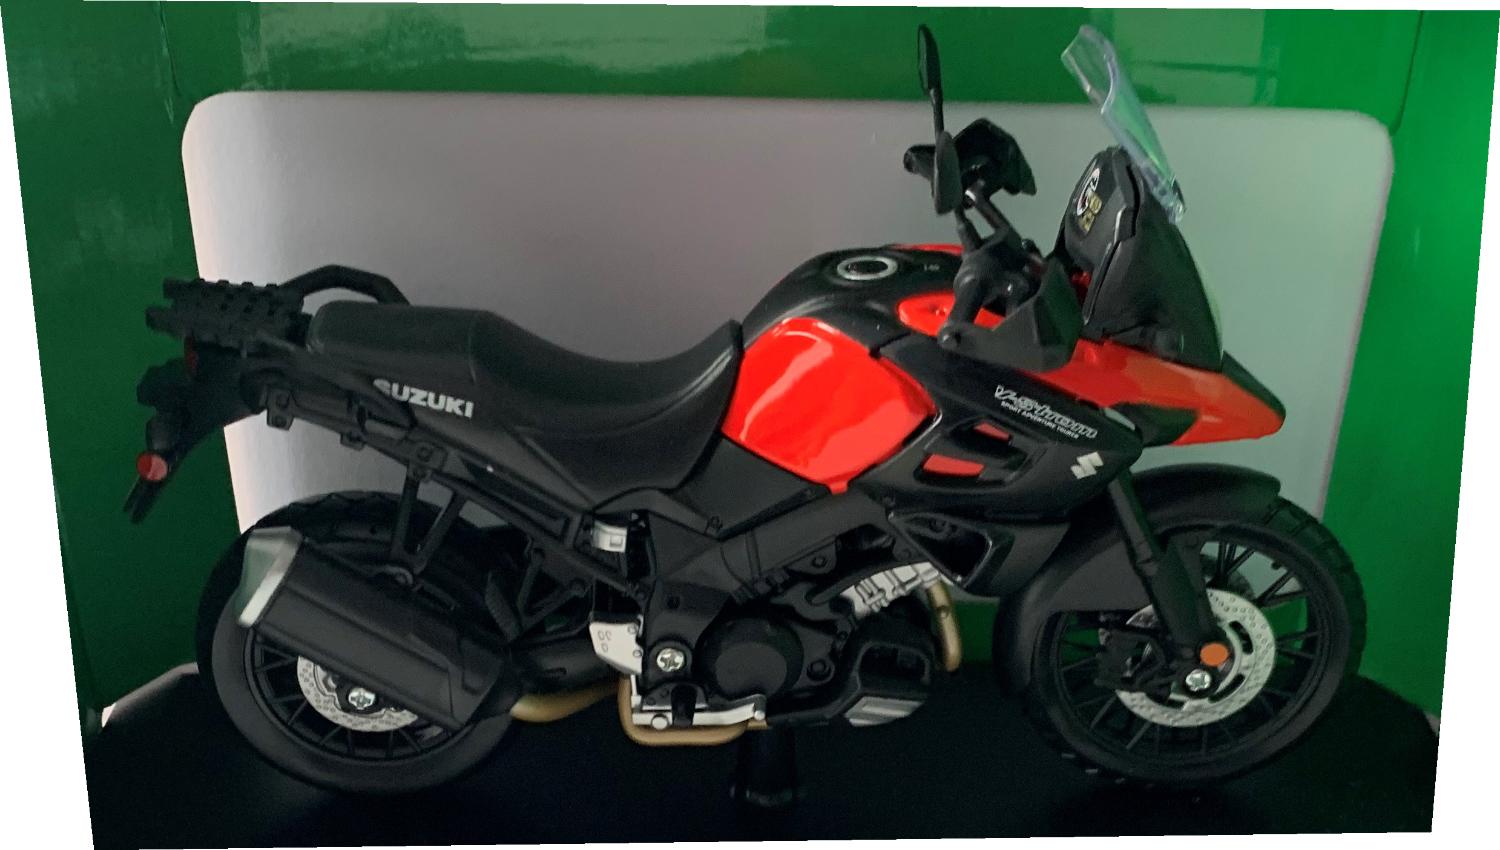 Suzuki V-Strom 1000 in red / black 1:12 scale model from Maisto, mounted on a plinth and presented in a green Suzuki themed box